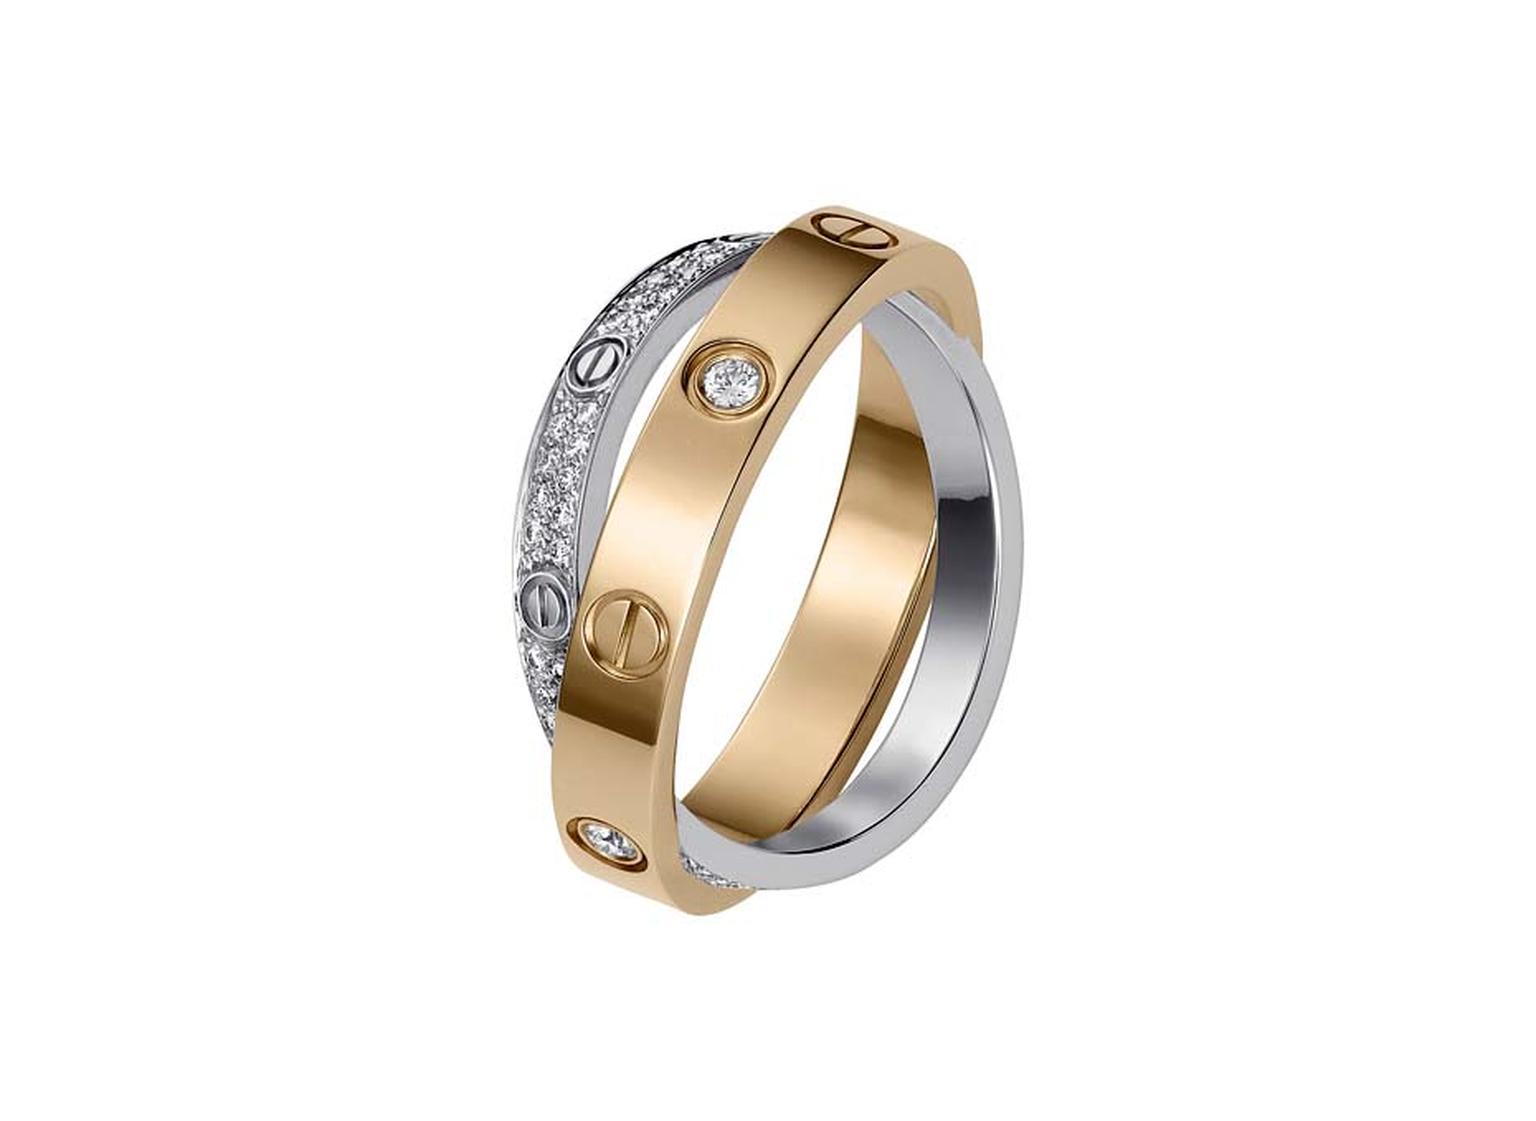 Cartier Love double ring in platinum and rose gold with diamonds.